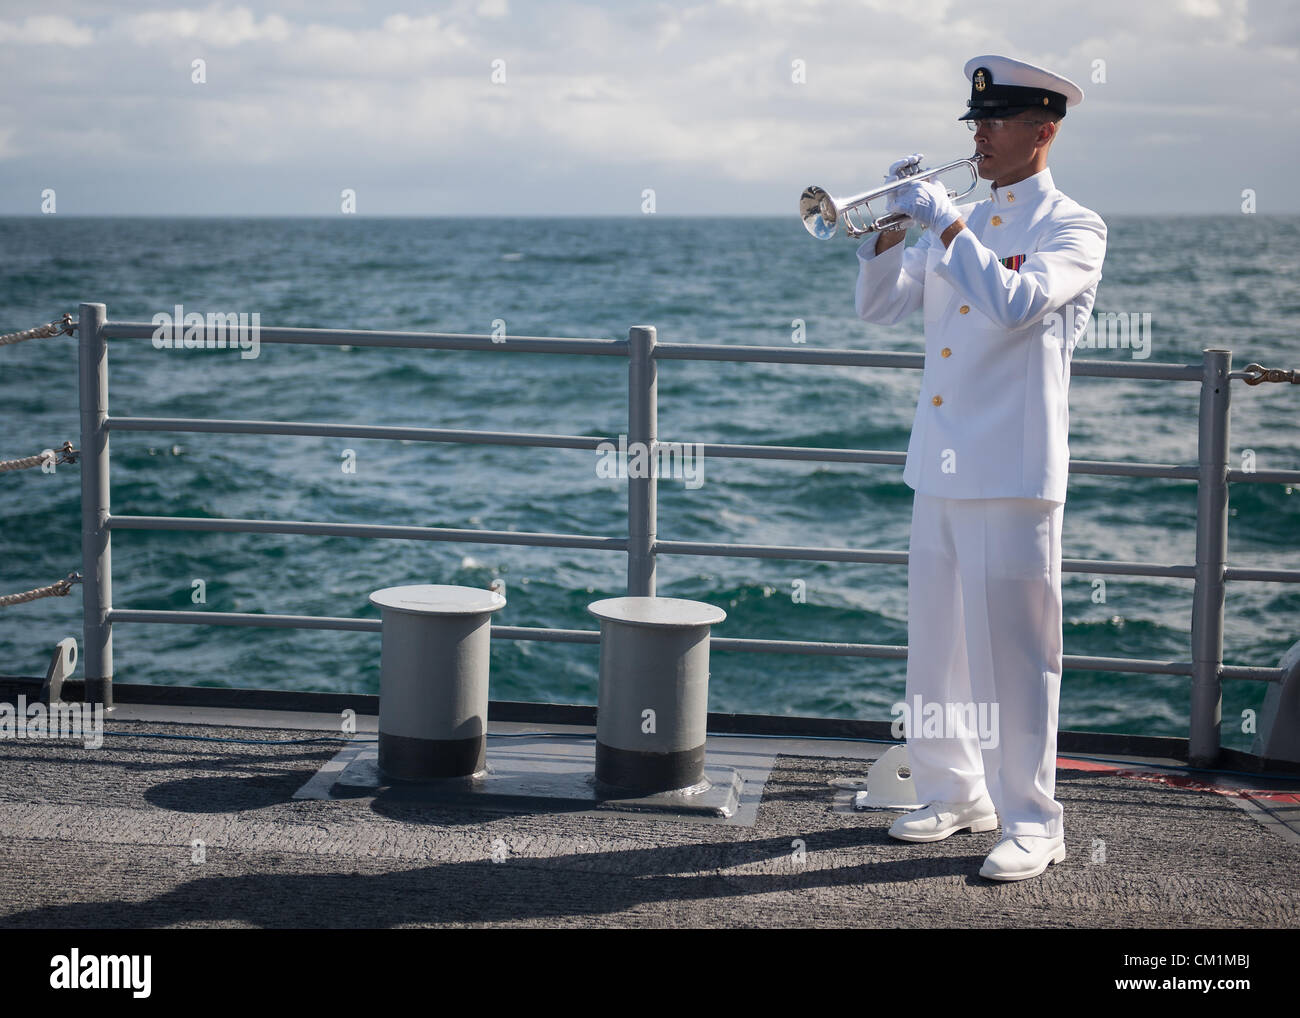 Chief Musician for the United States Navy Band, Gunnar Bruning, plays taps during the burial at sea service for her husband Apollo 11 astronaut Neil Armstrong September 14, 2012 aboard the USS Philippine Sea in the Atlantic Ocean. Armstrong, the first man to walk on the moon during the 1969 Apollo 11 mission, died August 25. He was 82. Stock Photo